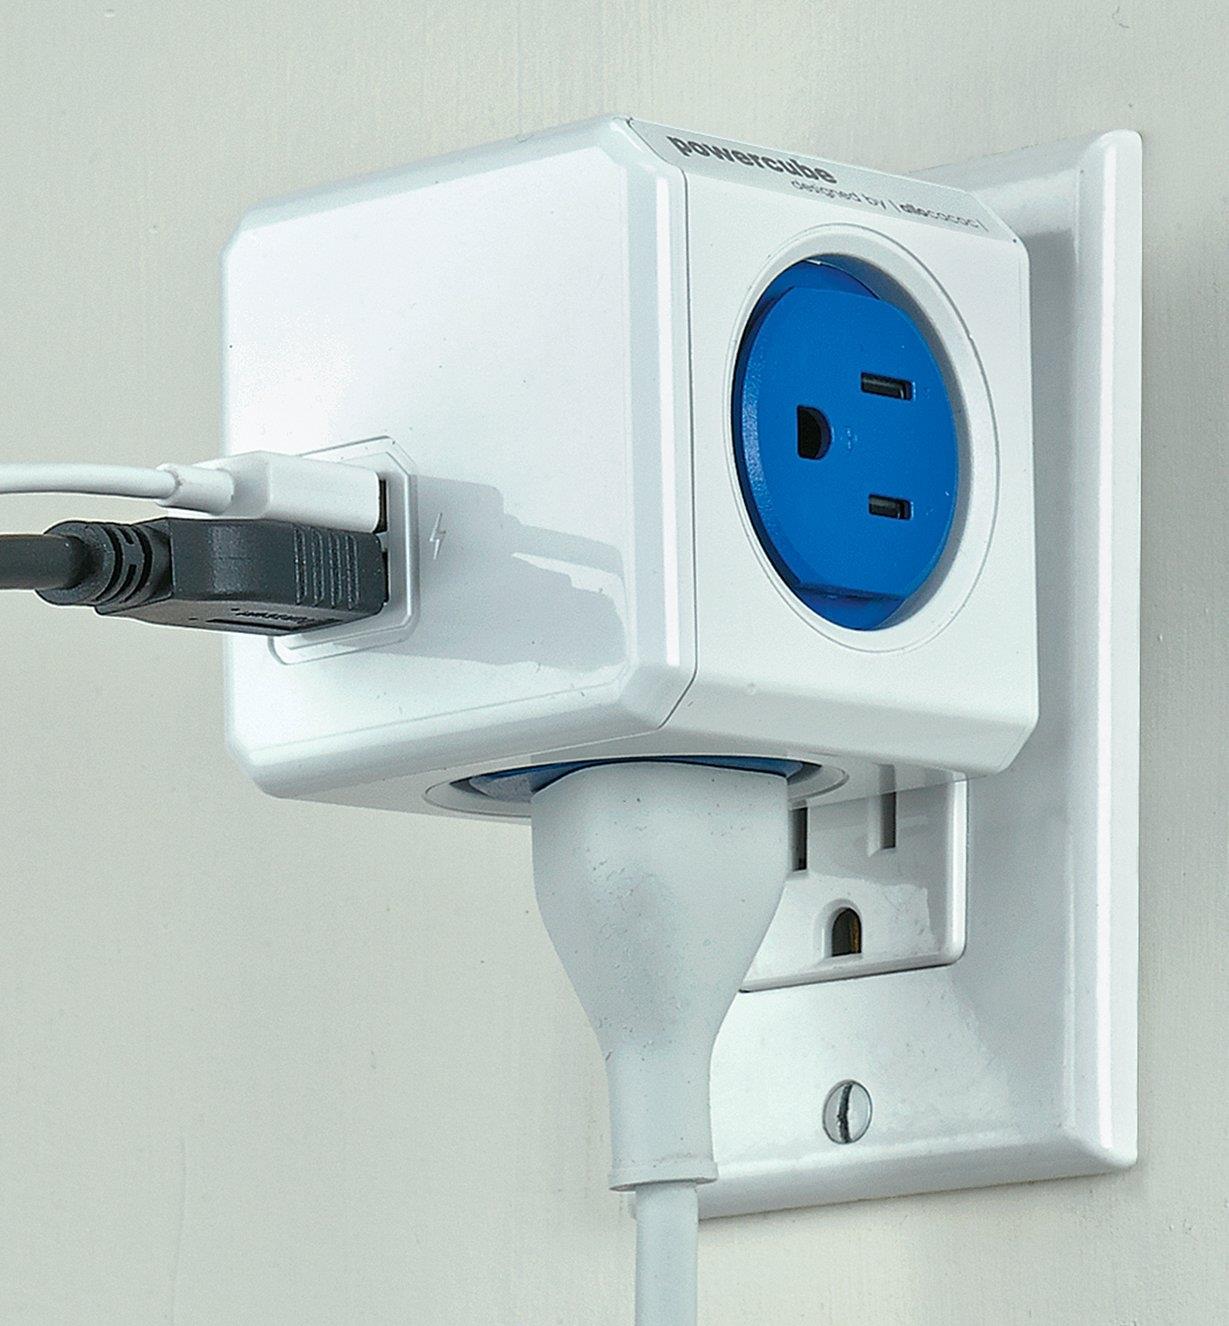 PowerCube with several cords plugged into it, plugged into a wall outlet